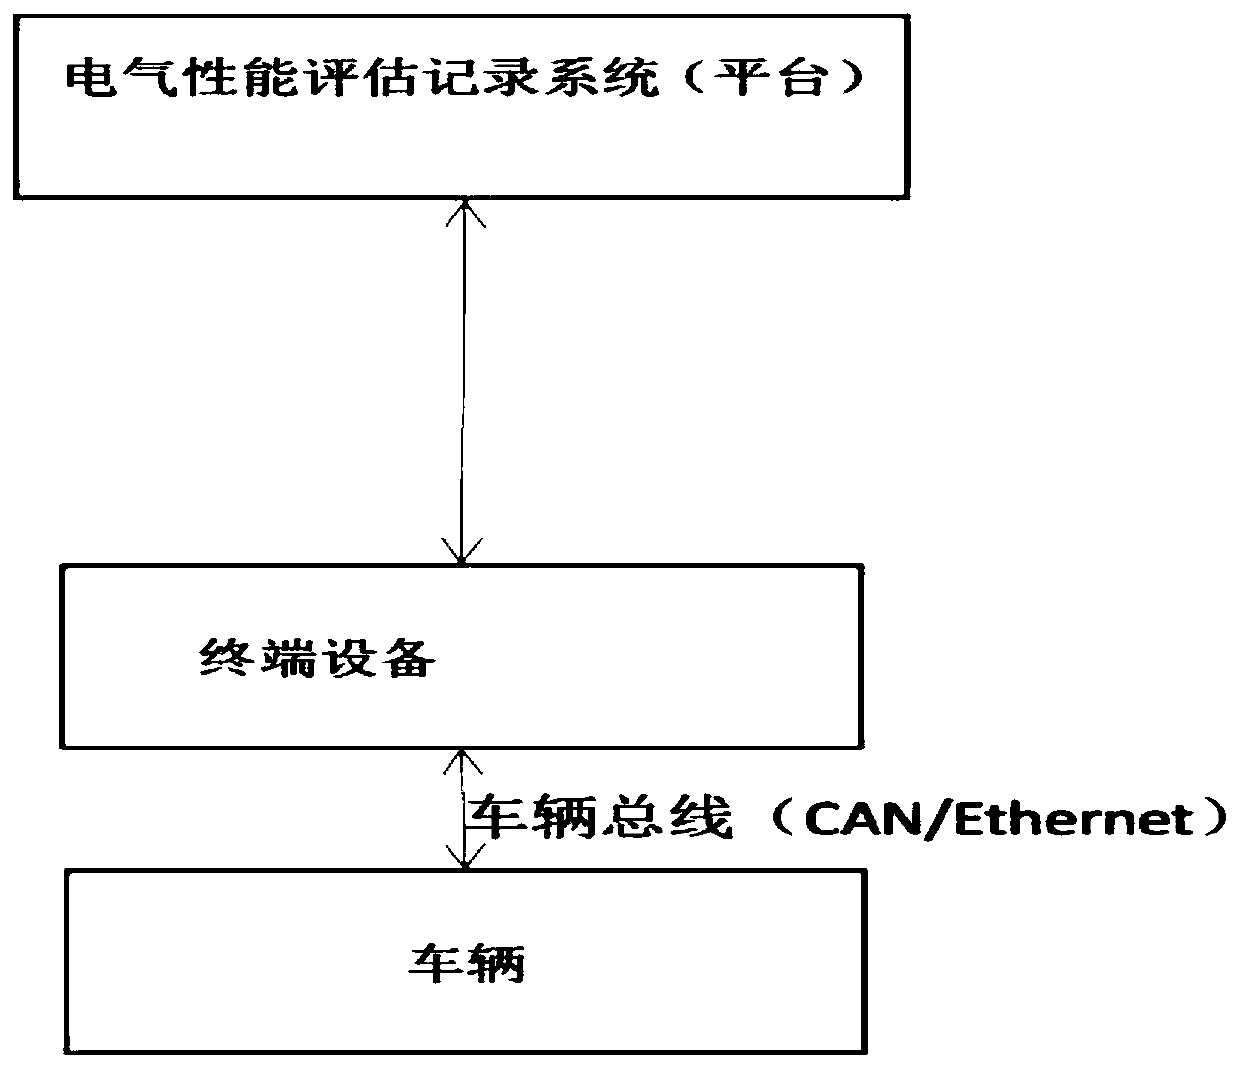 A vehicle life cycle electrical performance monitoring and evaluation system and evaluation method